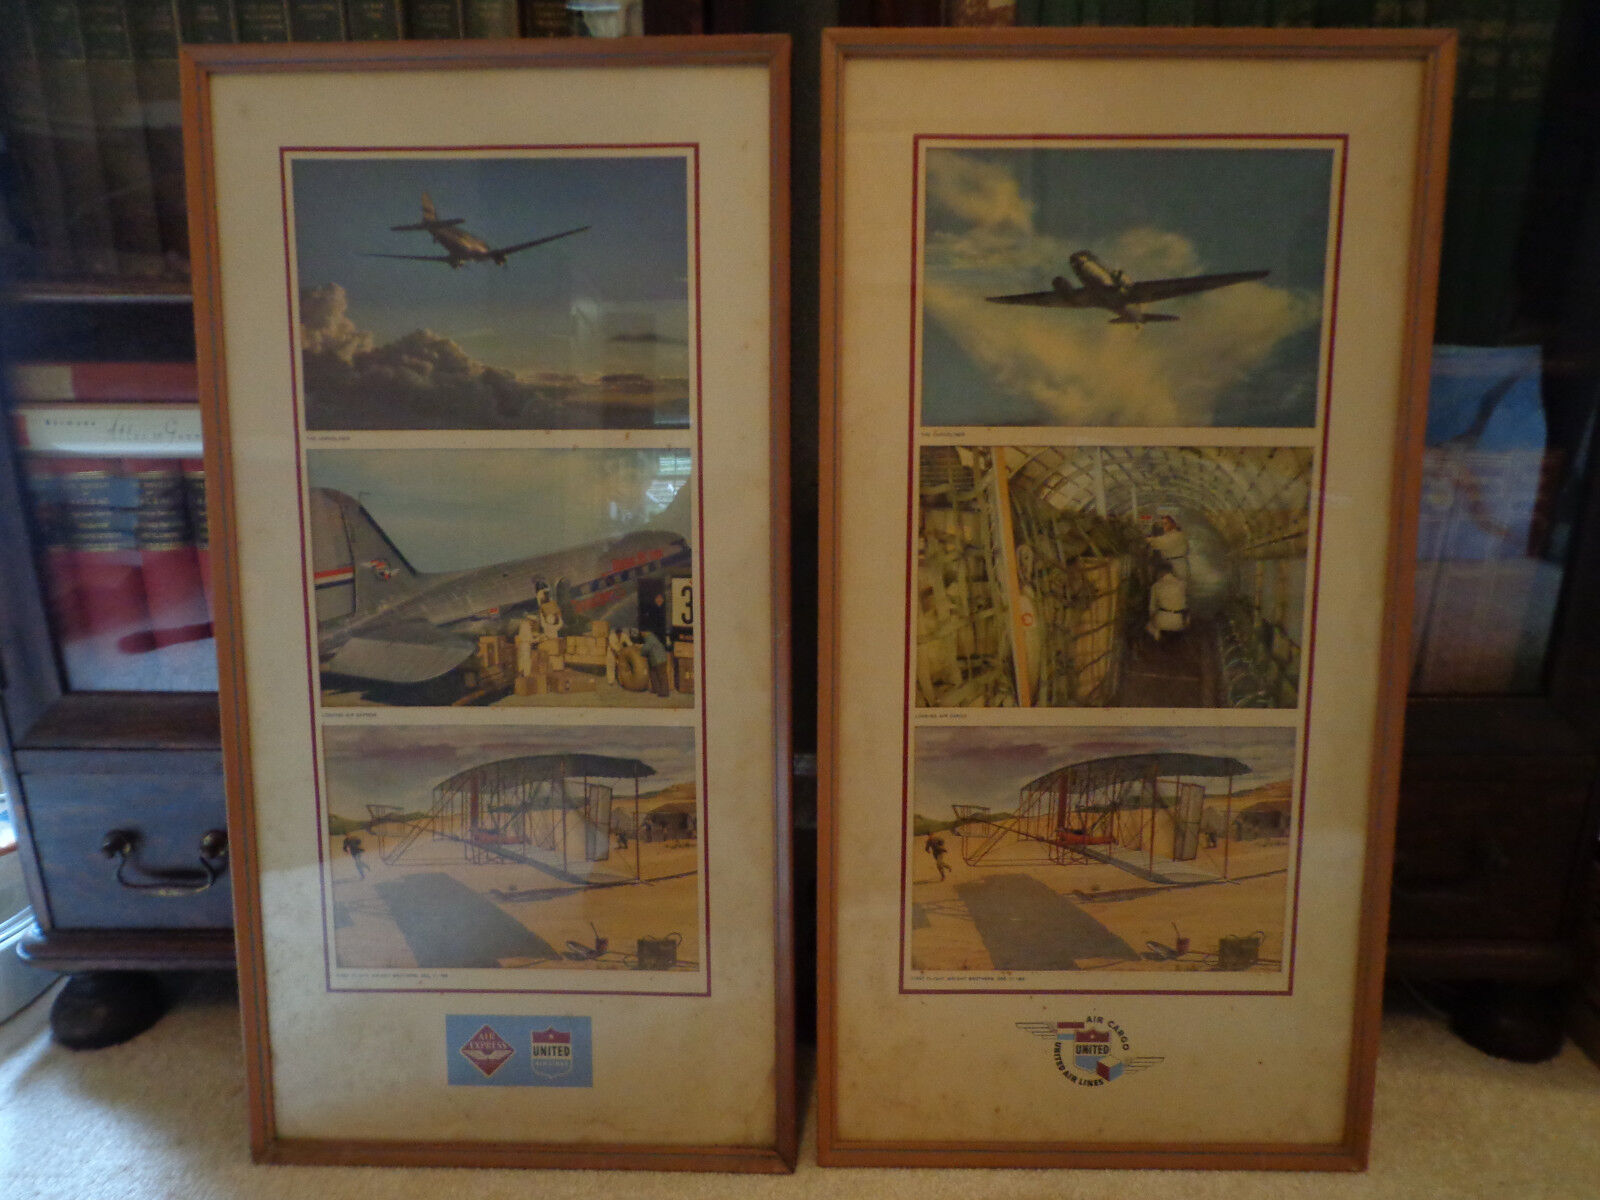 Vintage United Airlines Advertising Lobby Posters 1930’s DC-3 Cargoliner Framed 